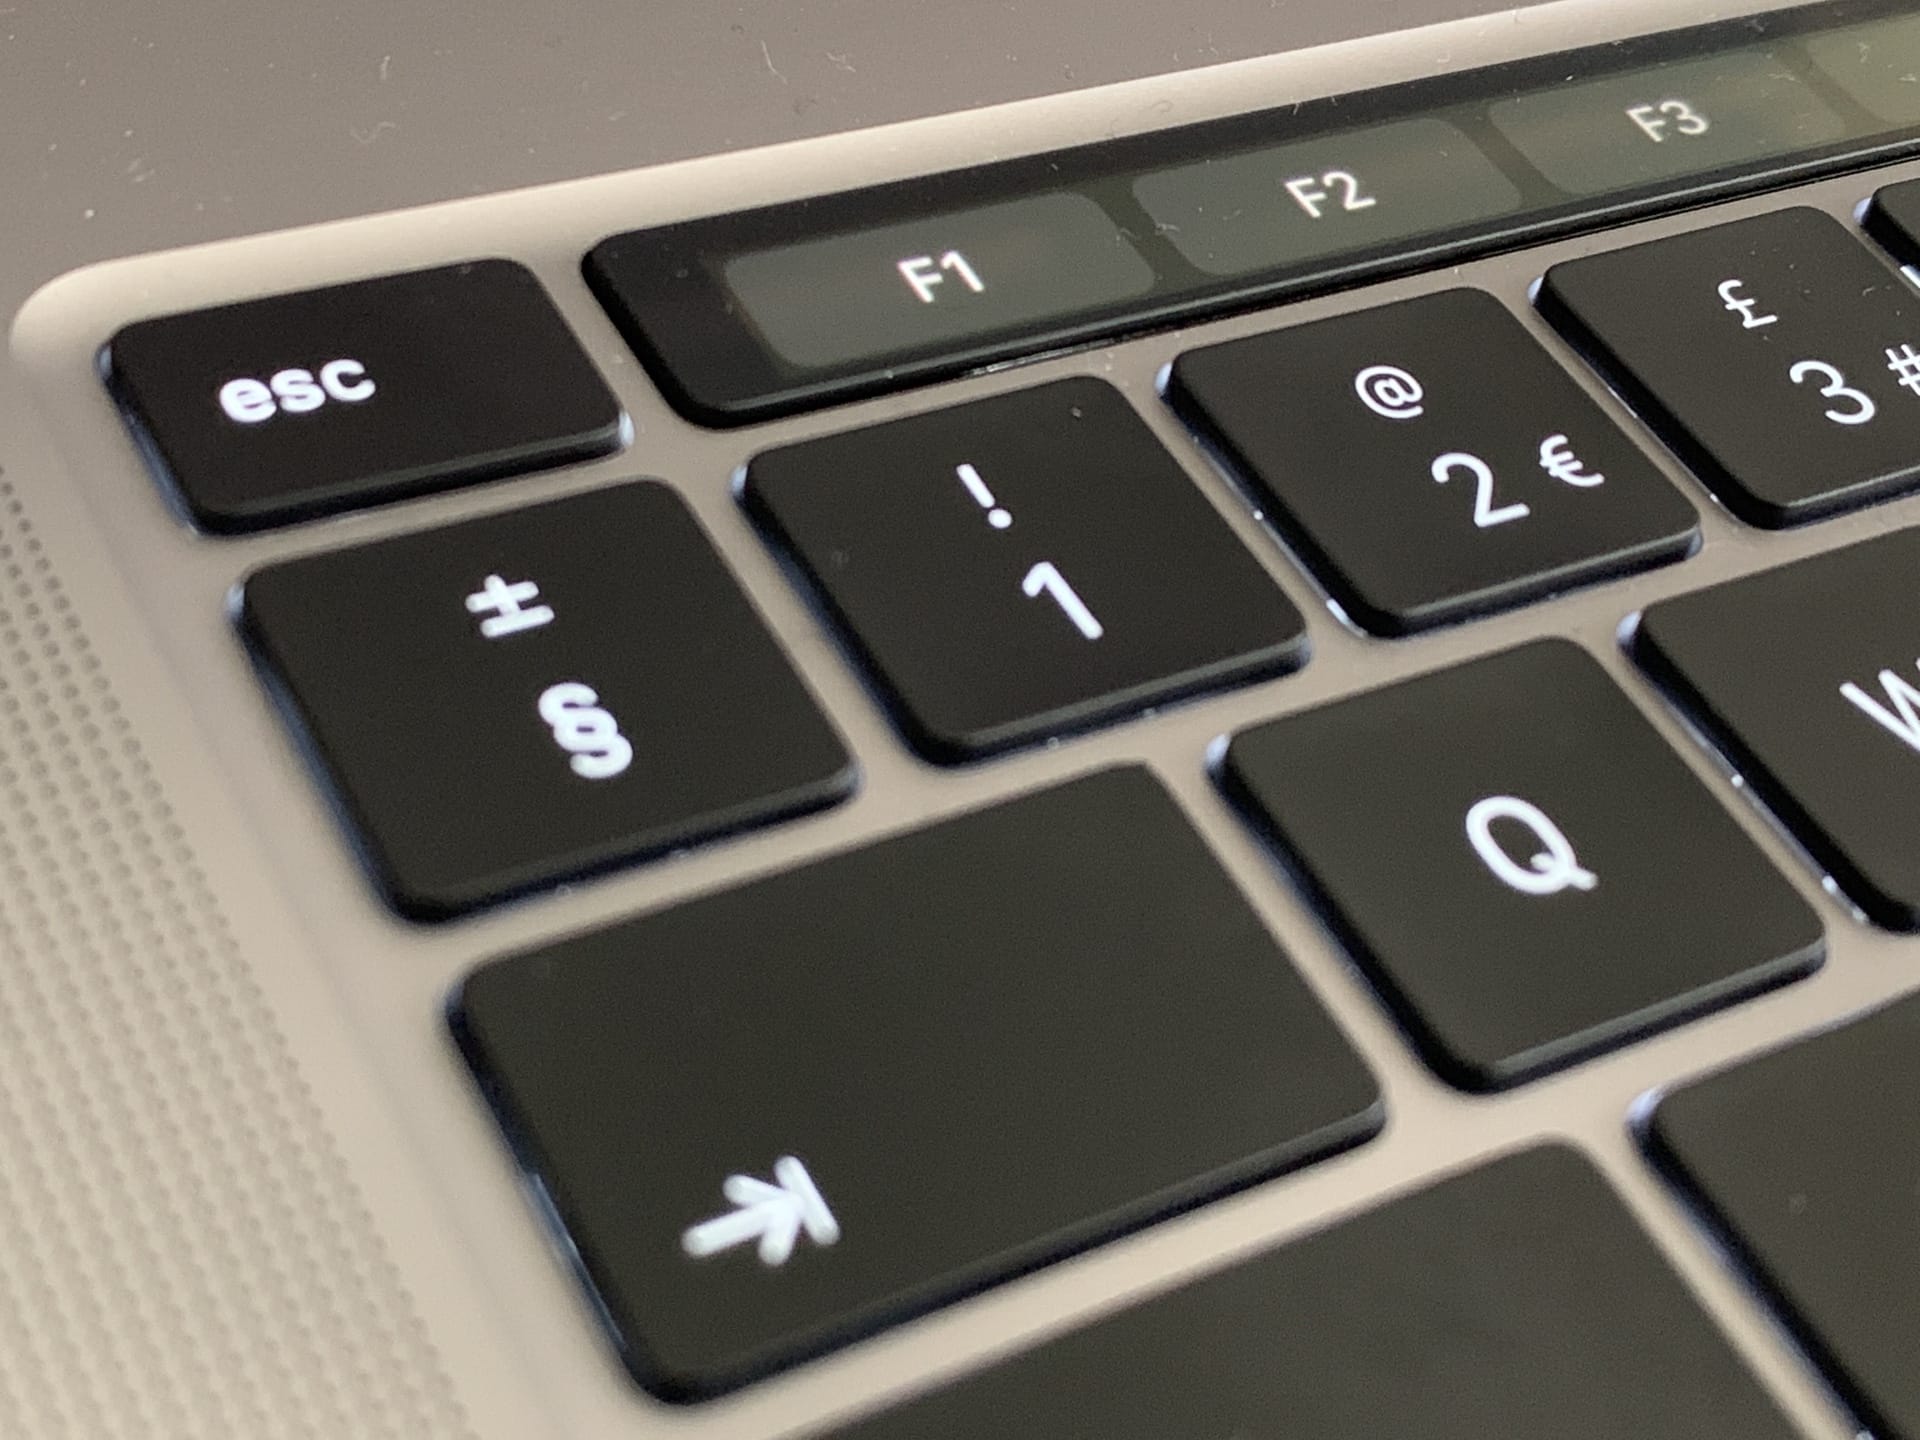 You can turn the Touch Bar into a row of permanent function keys, if you like. 